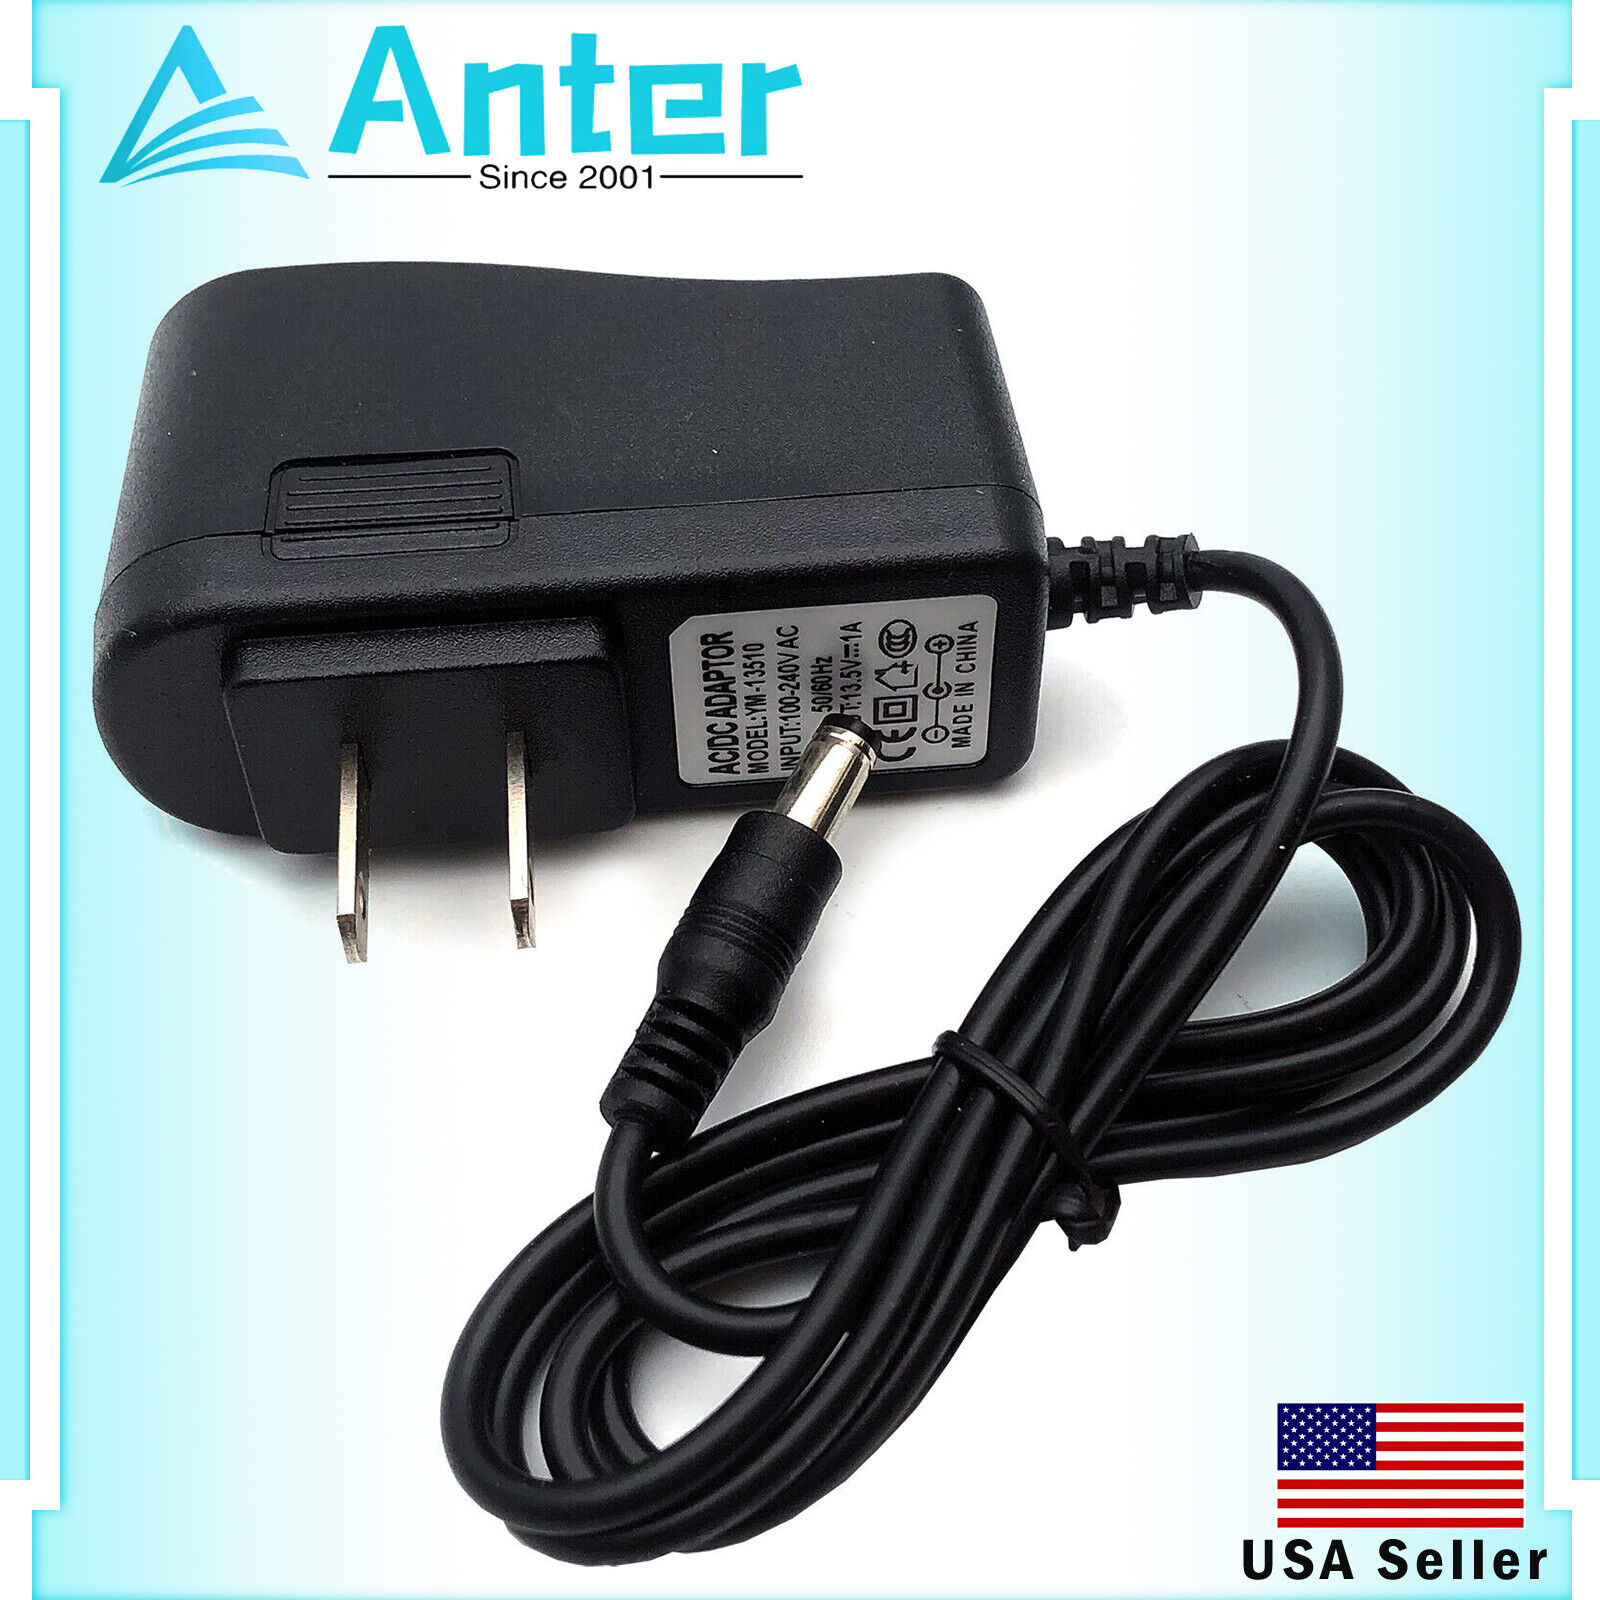 14V AC / DC Adapter for Halo Bolt 58830 Portable Emergency Charger/Multifuncti